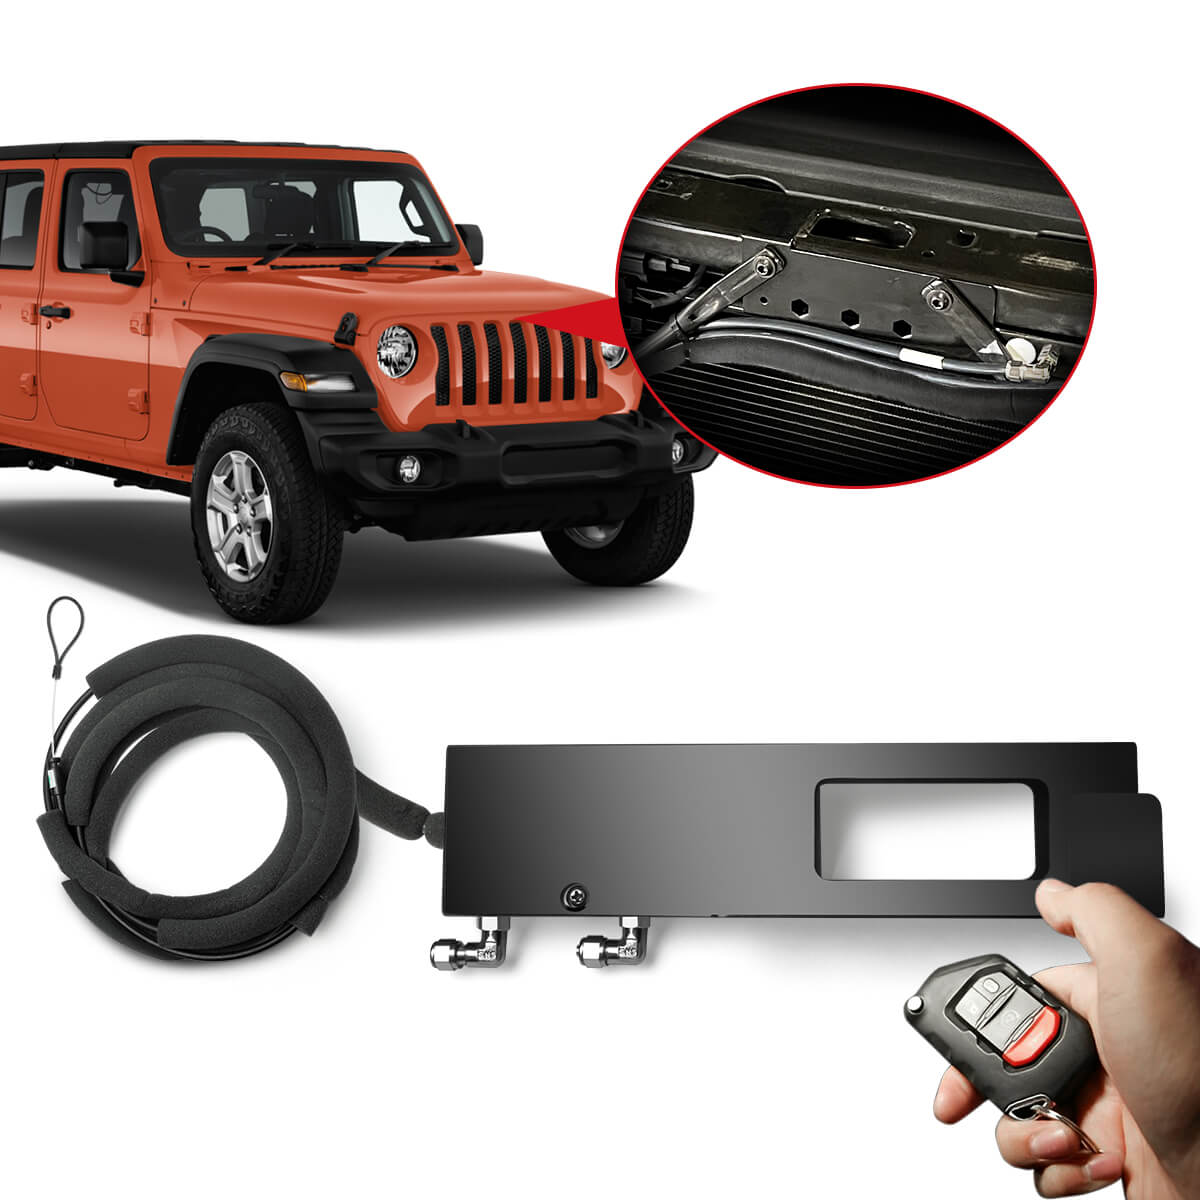 Lasfit Stealth Anti-Theft Automatic Hood Lock System for 18-23 Jeep Wr